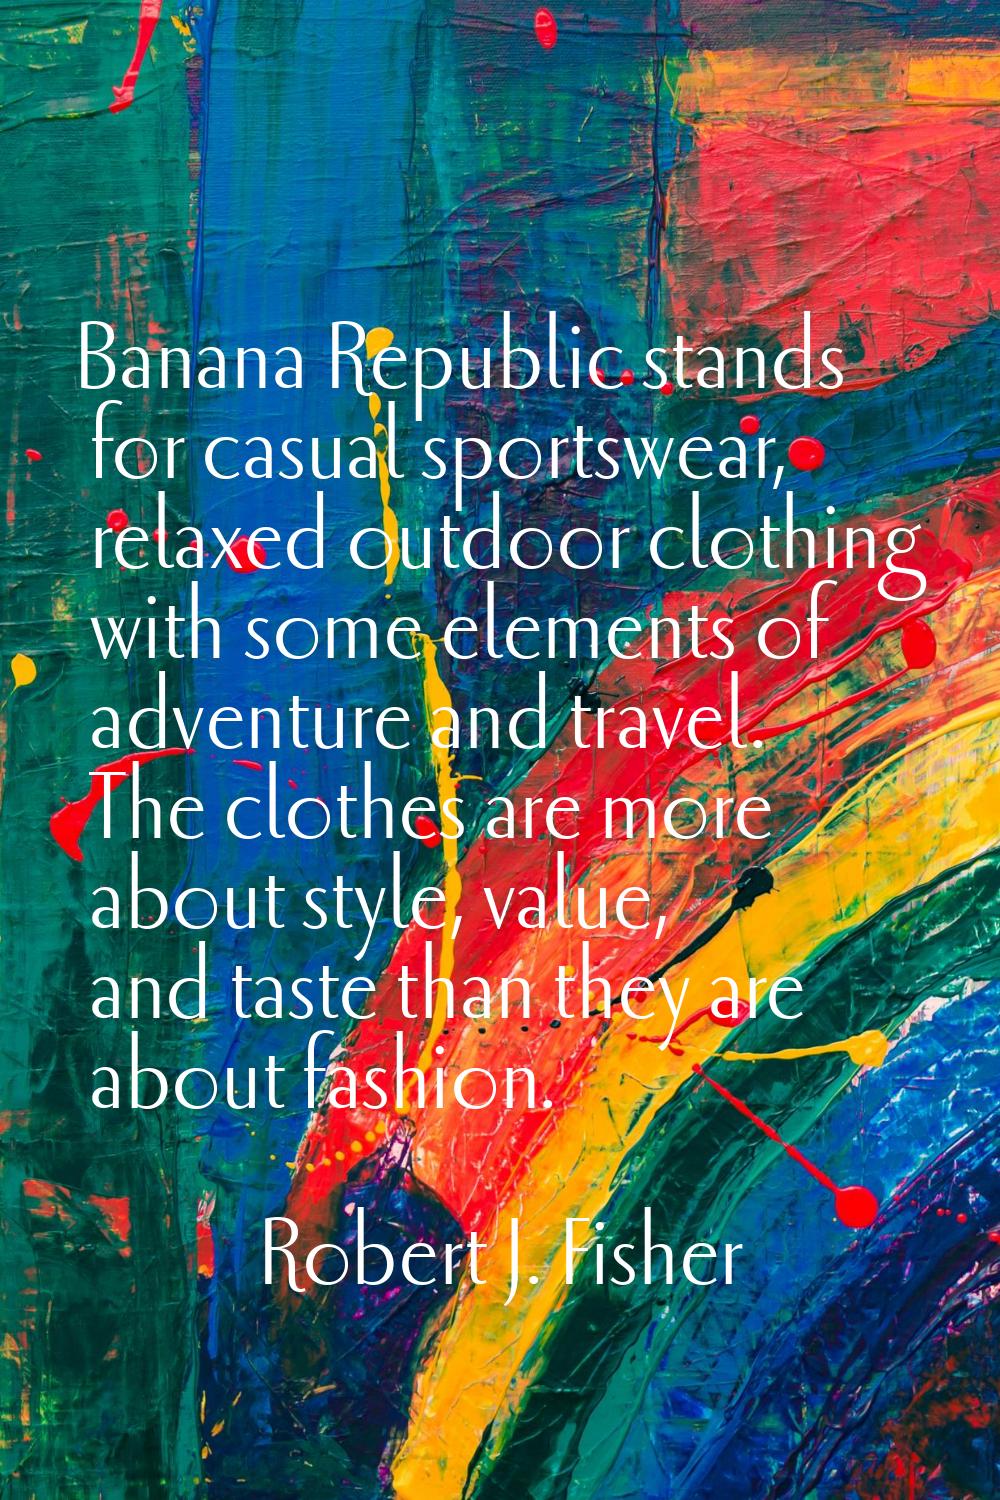 Banana Republic stands for casual sportswear, relaxed outdoor clothing with some elements of advent